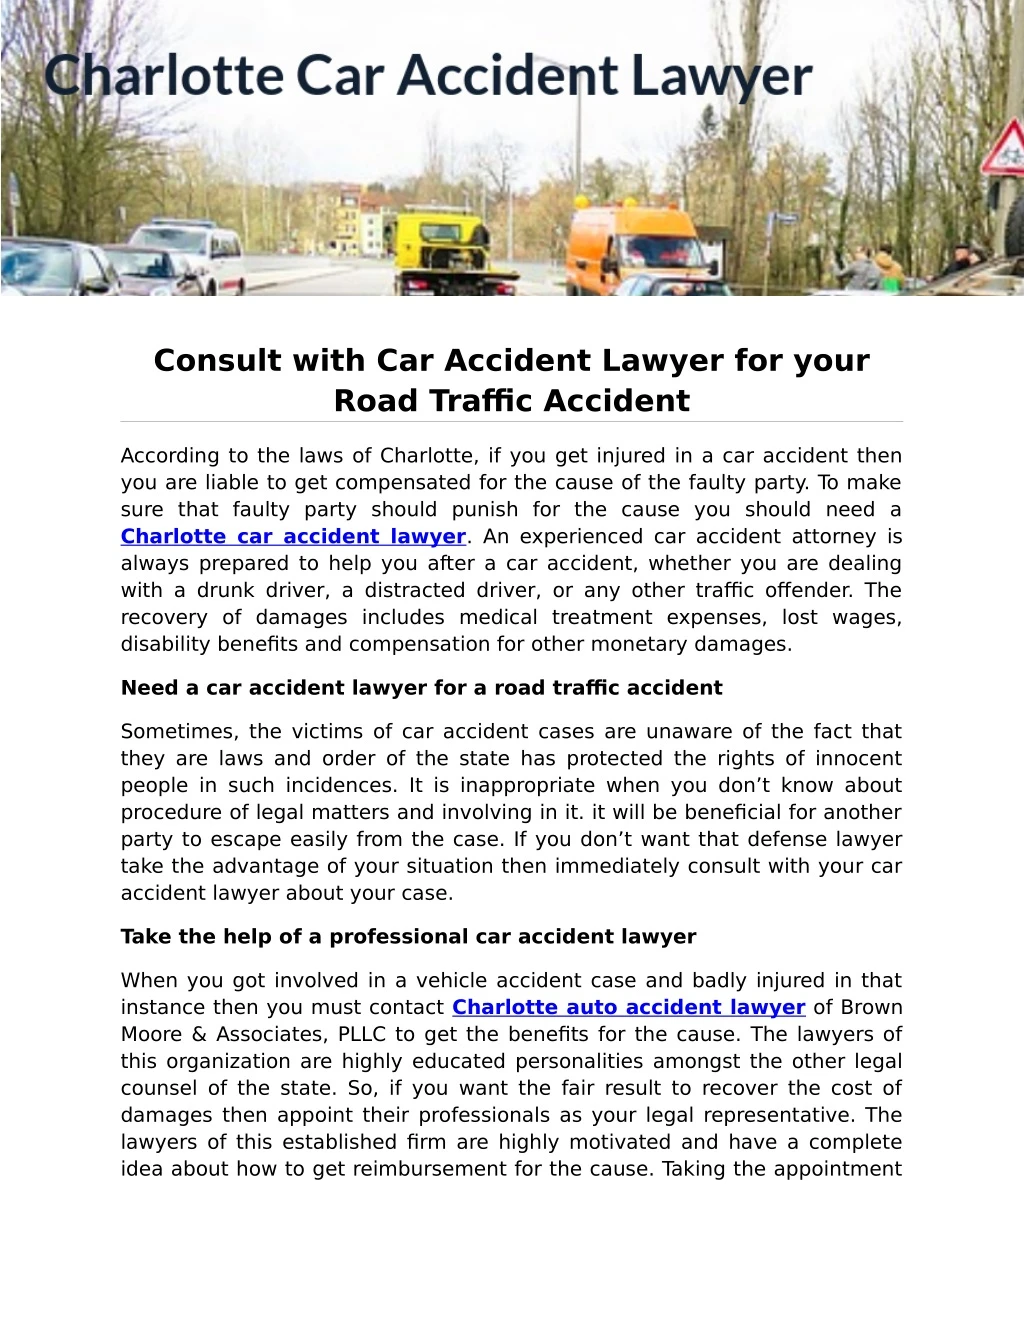 consult with car accident lawyer for your road